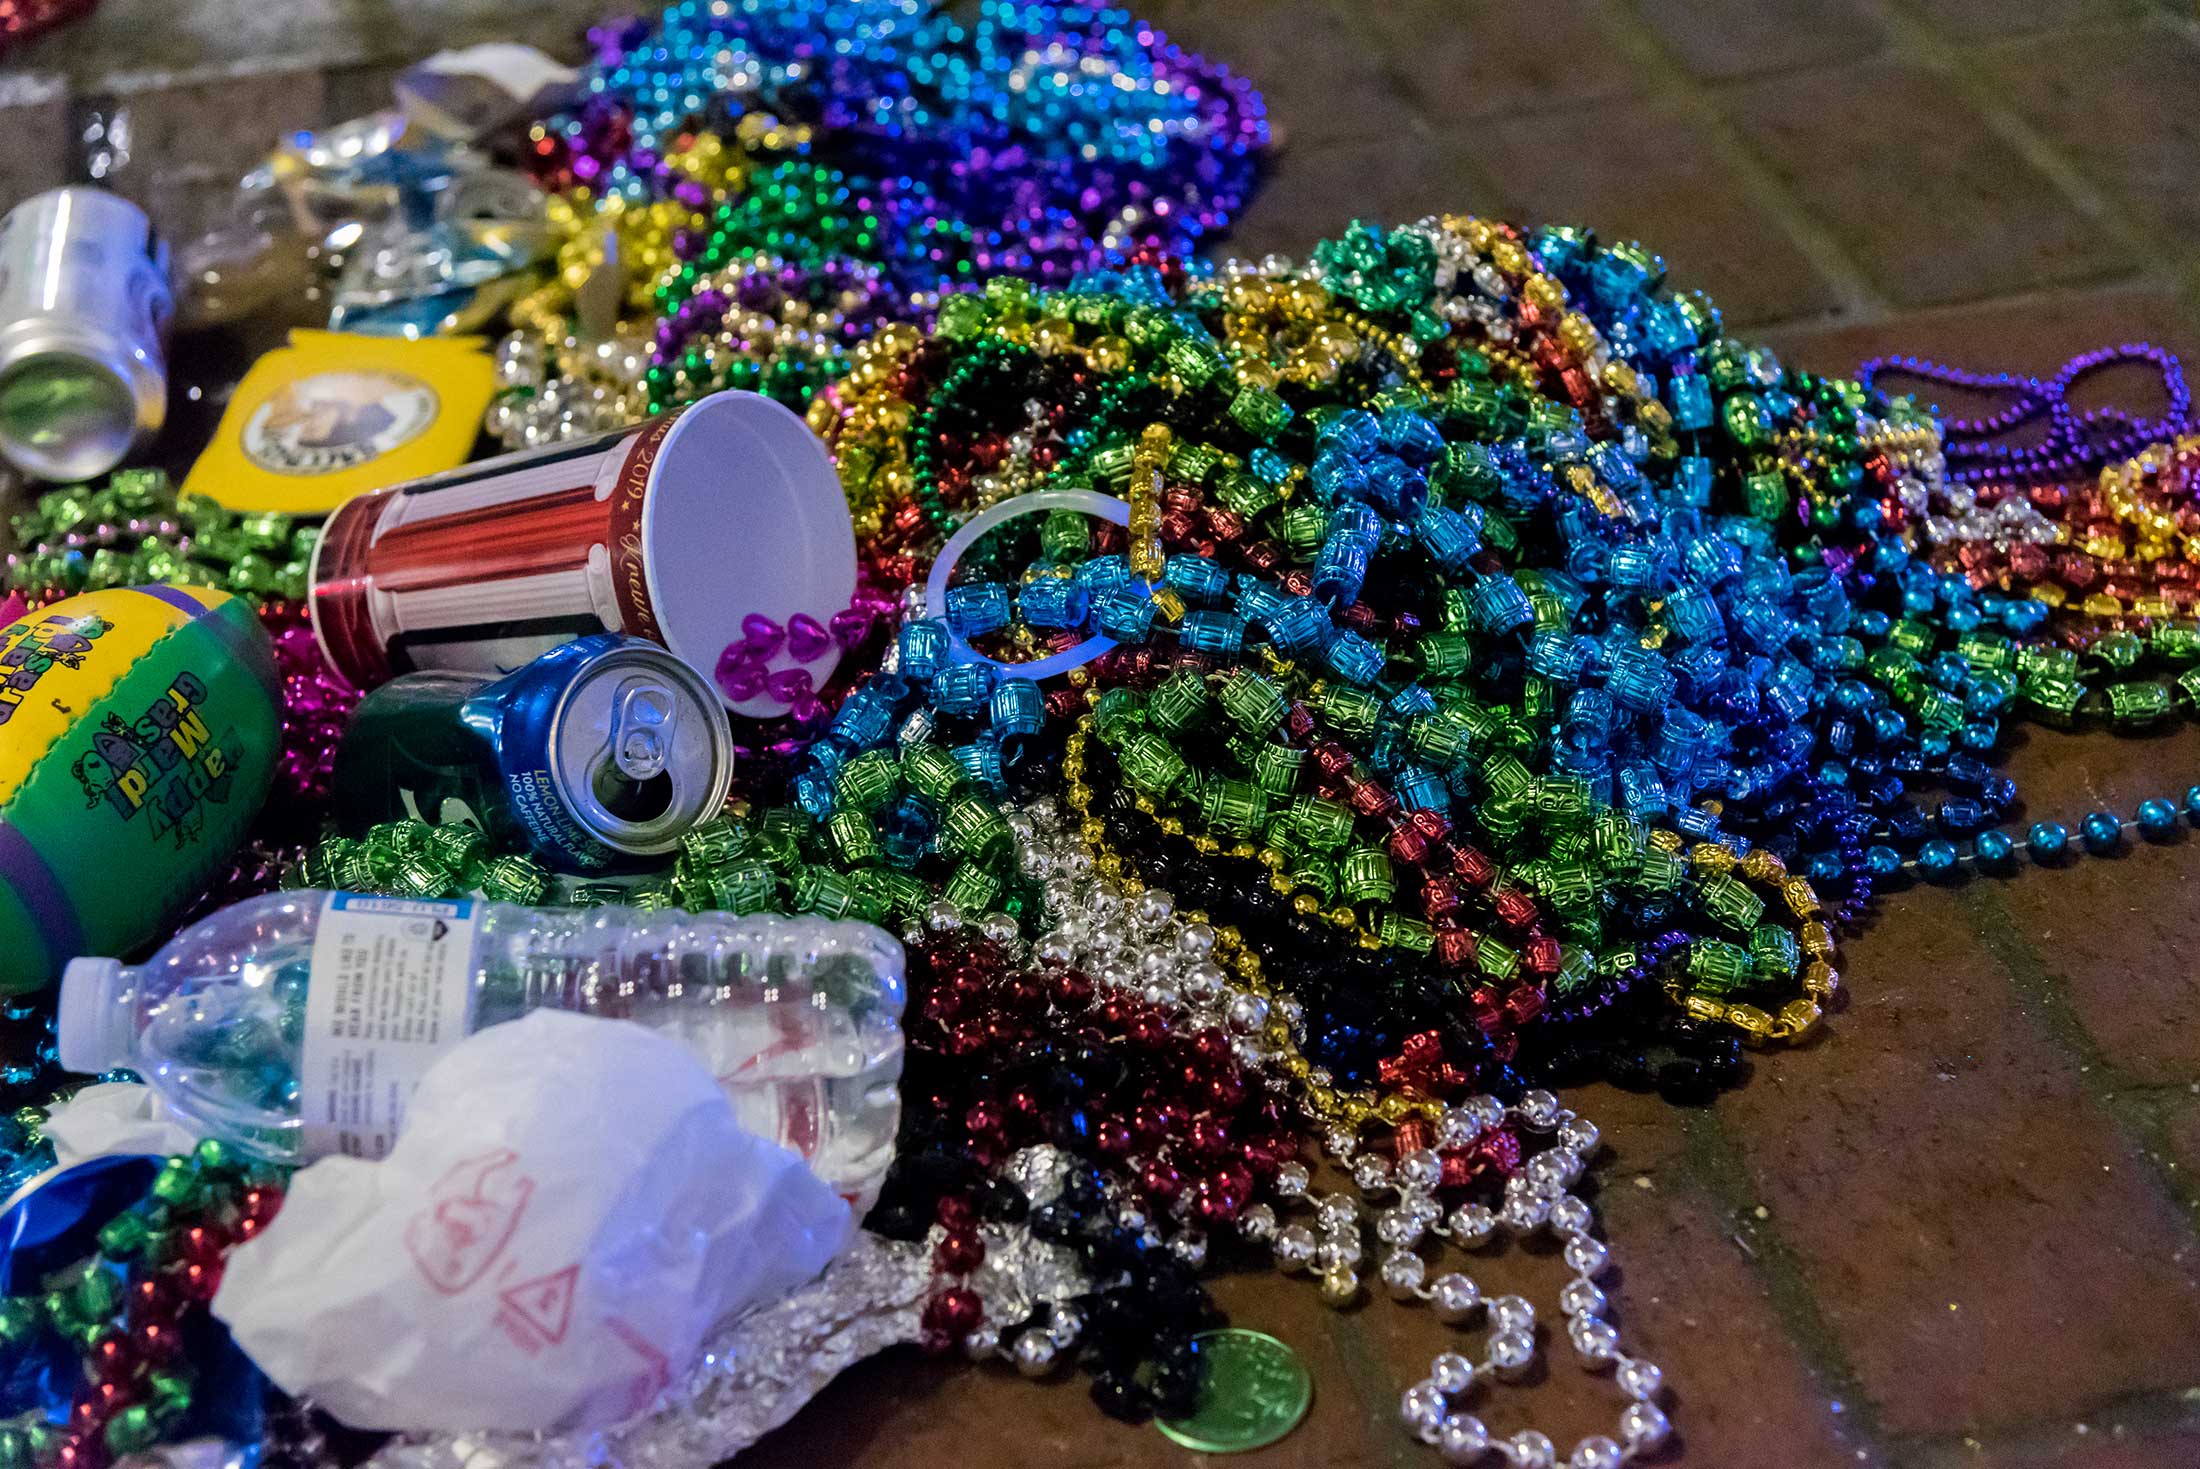 Biodegradable Mardi Gras Beads Could Help Save The Environment